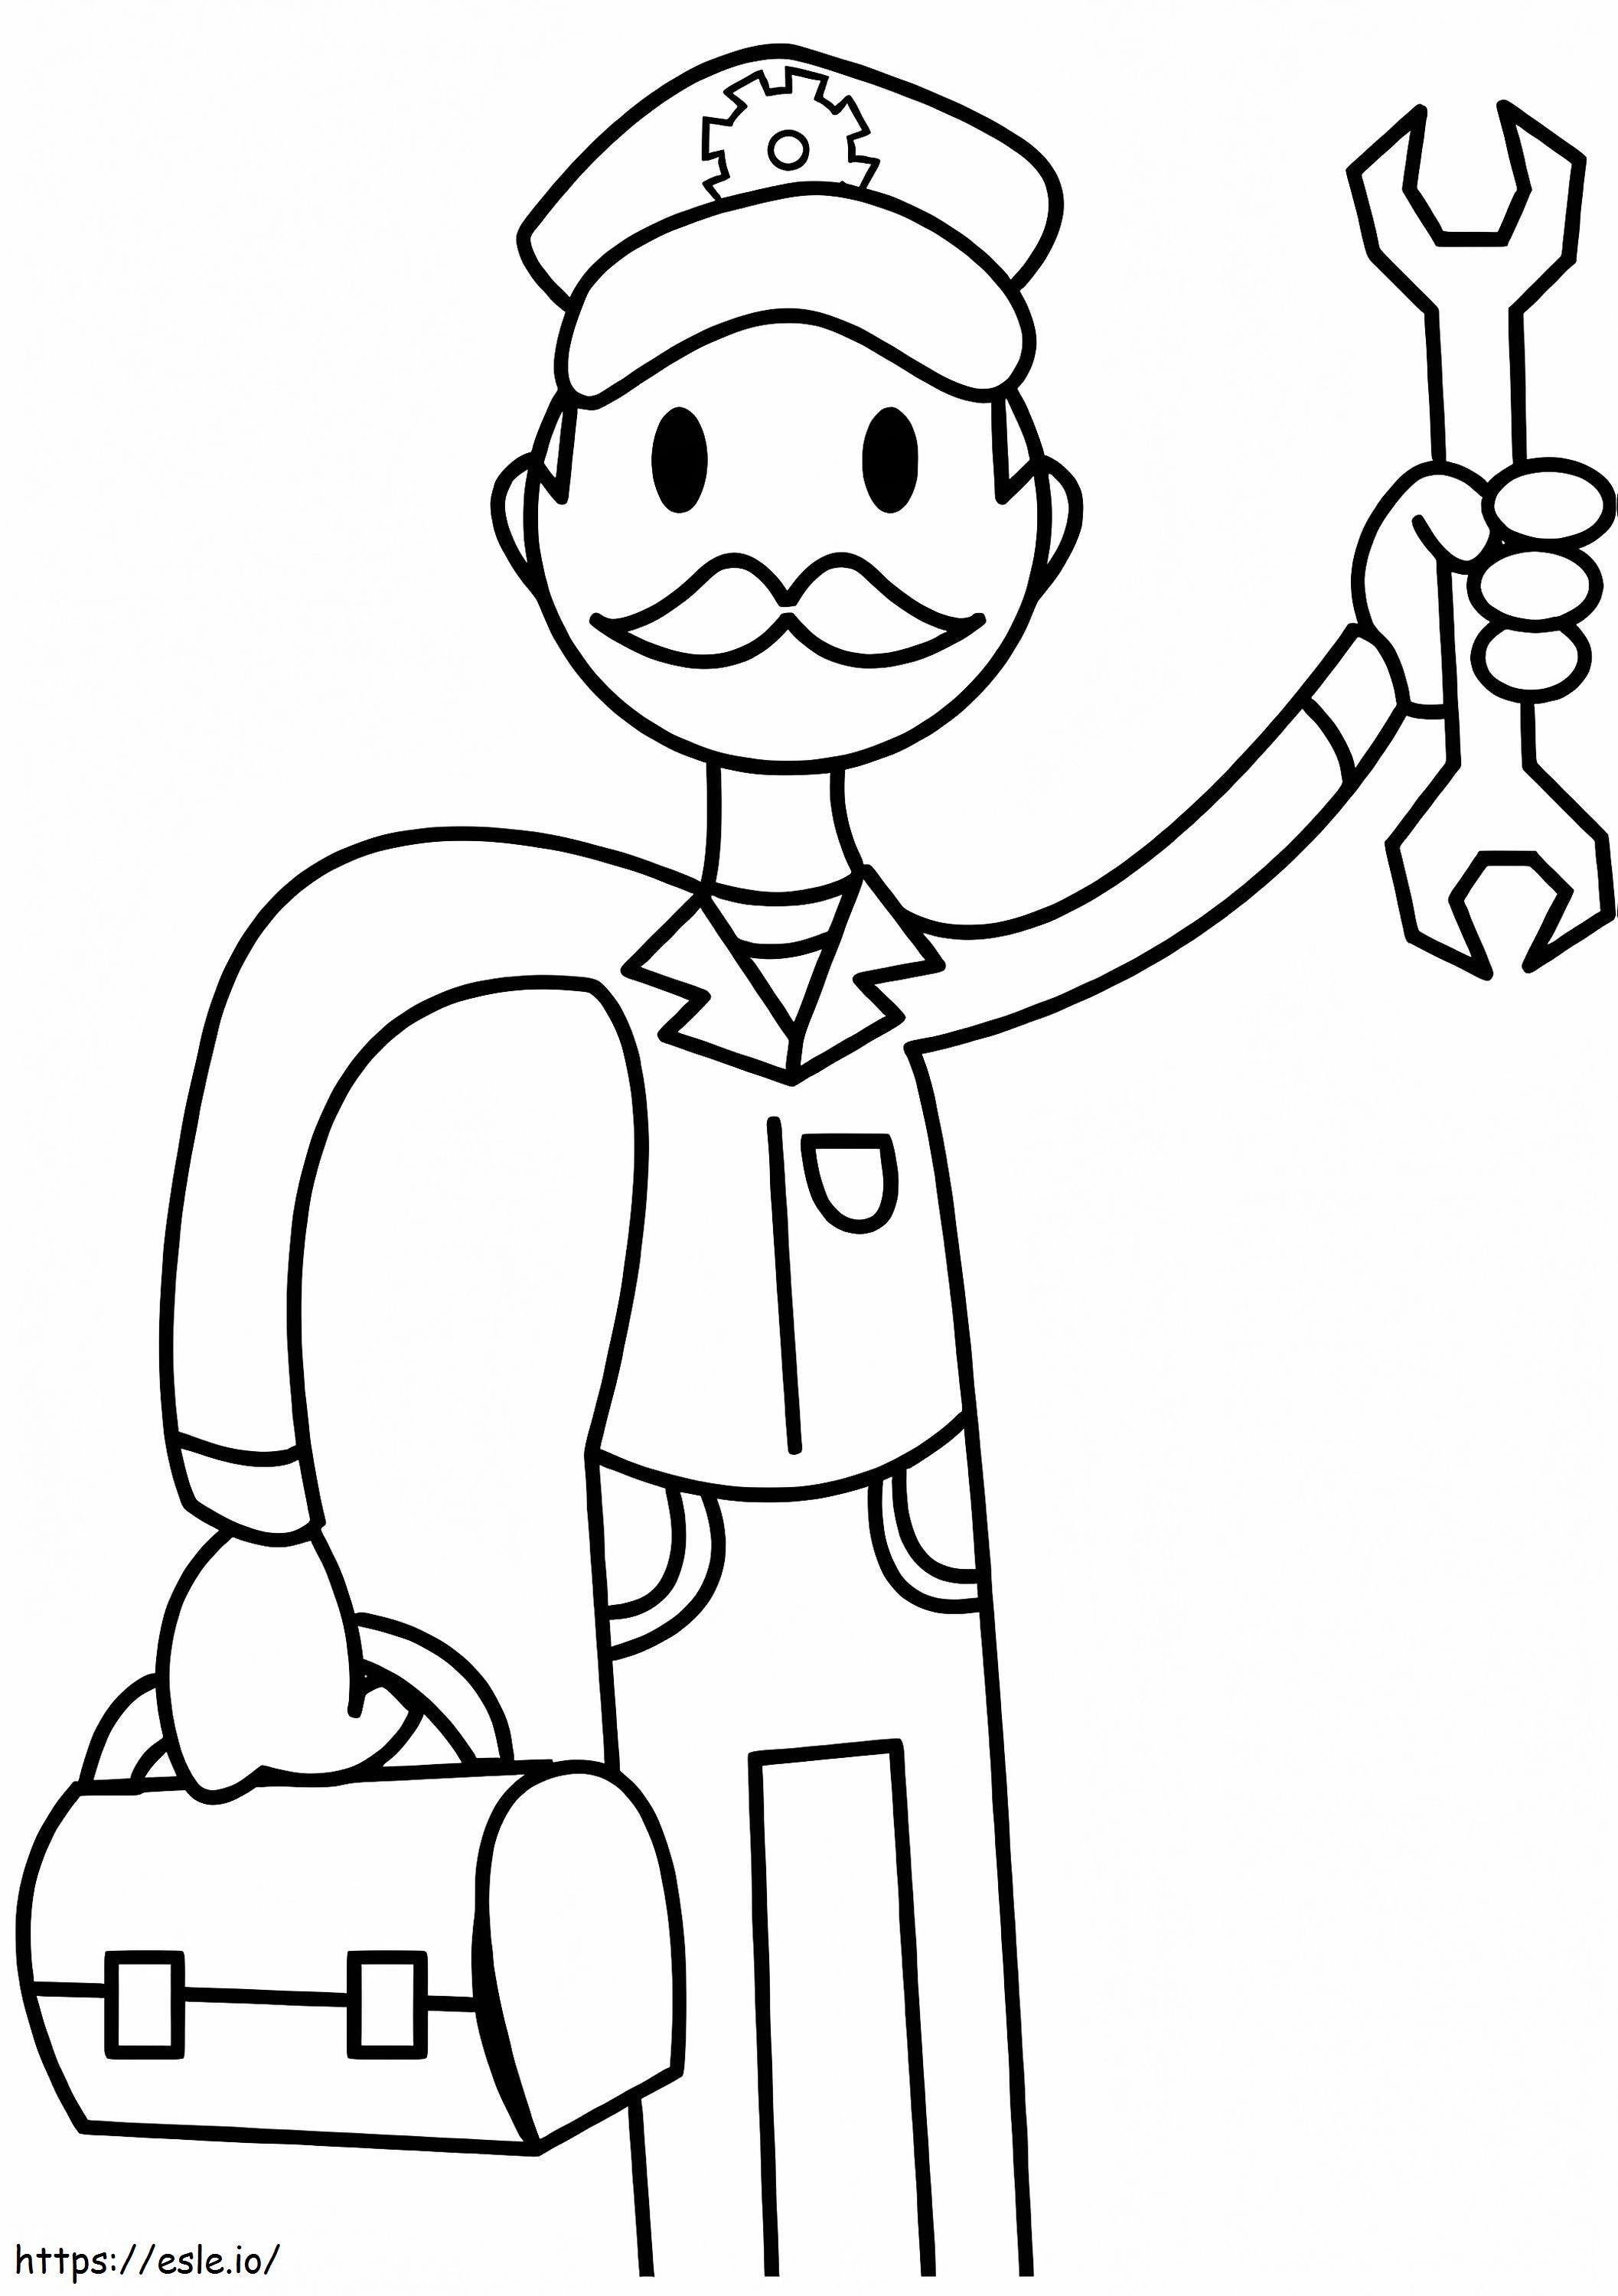 Mechanic 8 coloring page